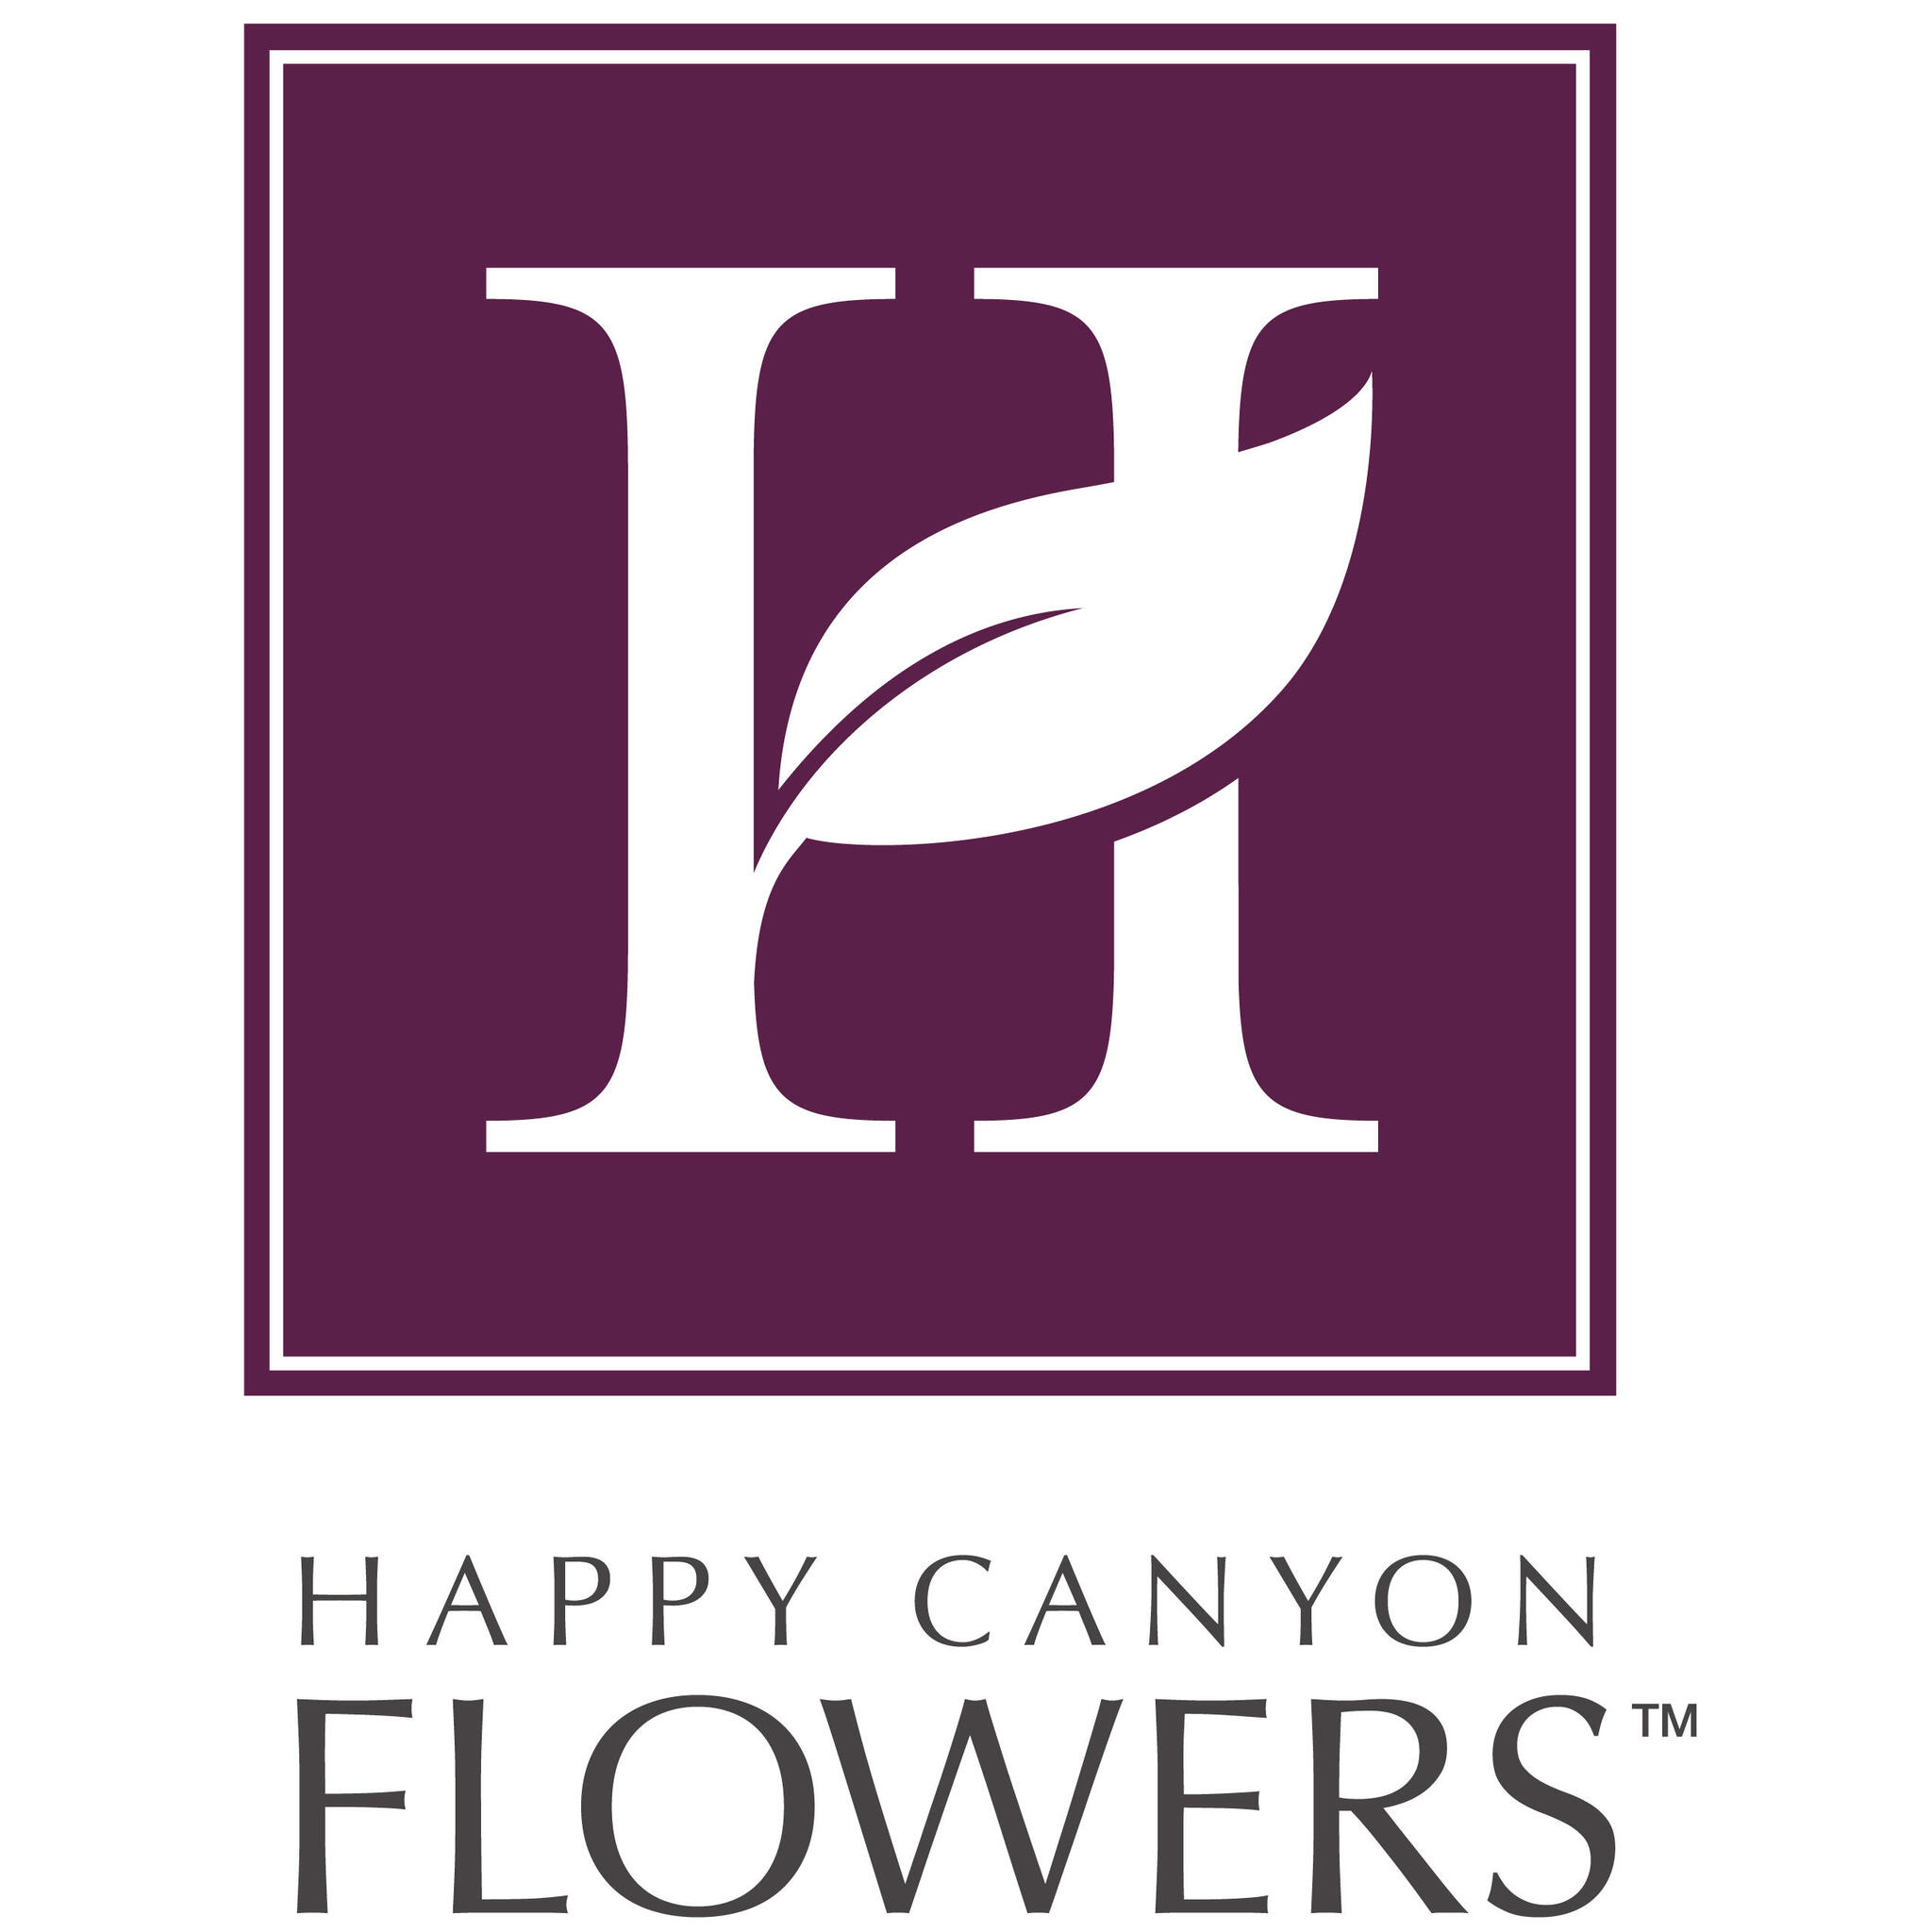 Happy Canyon Flowers Denver Co